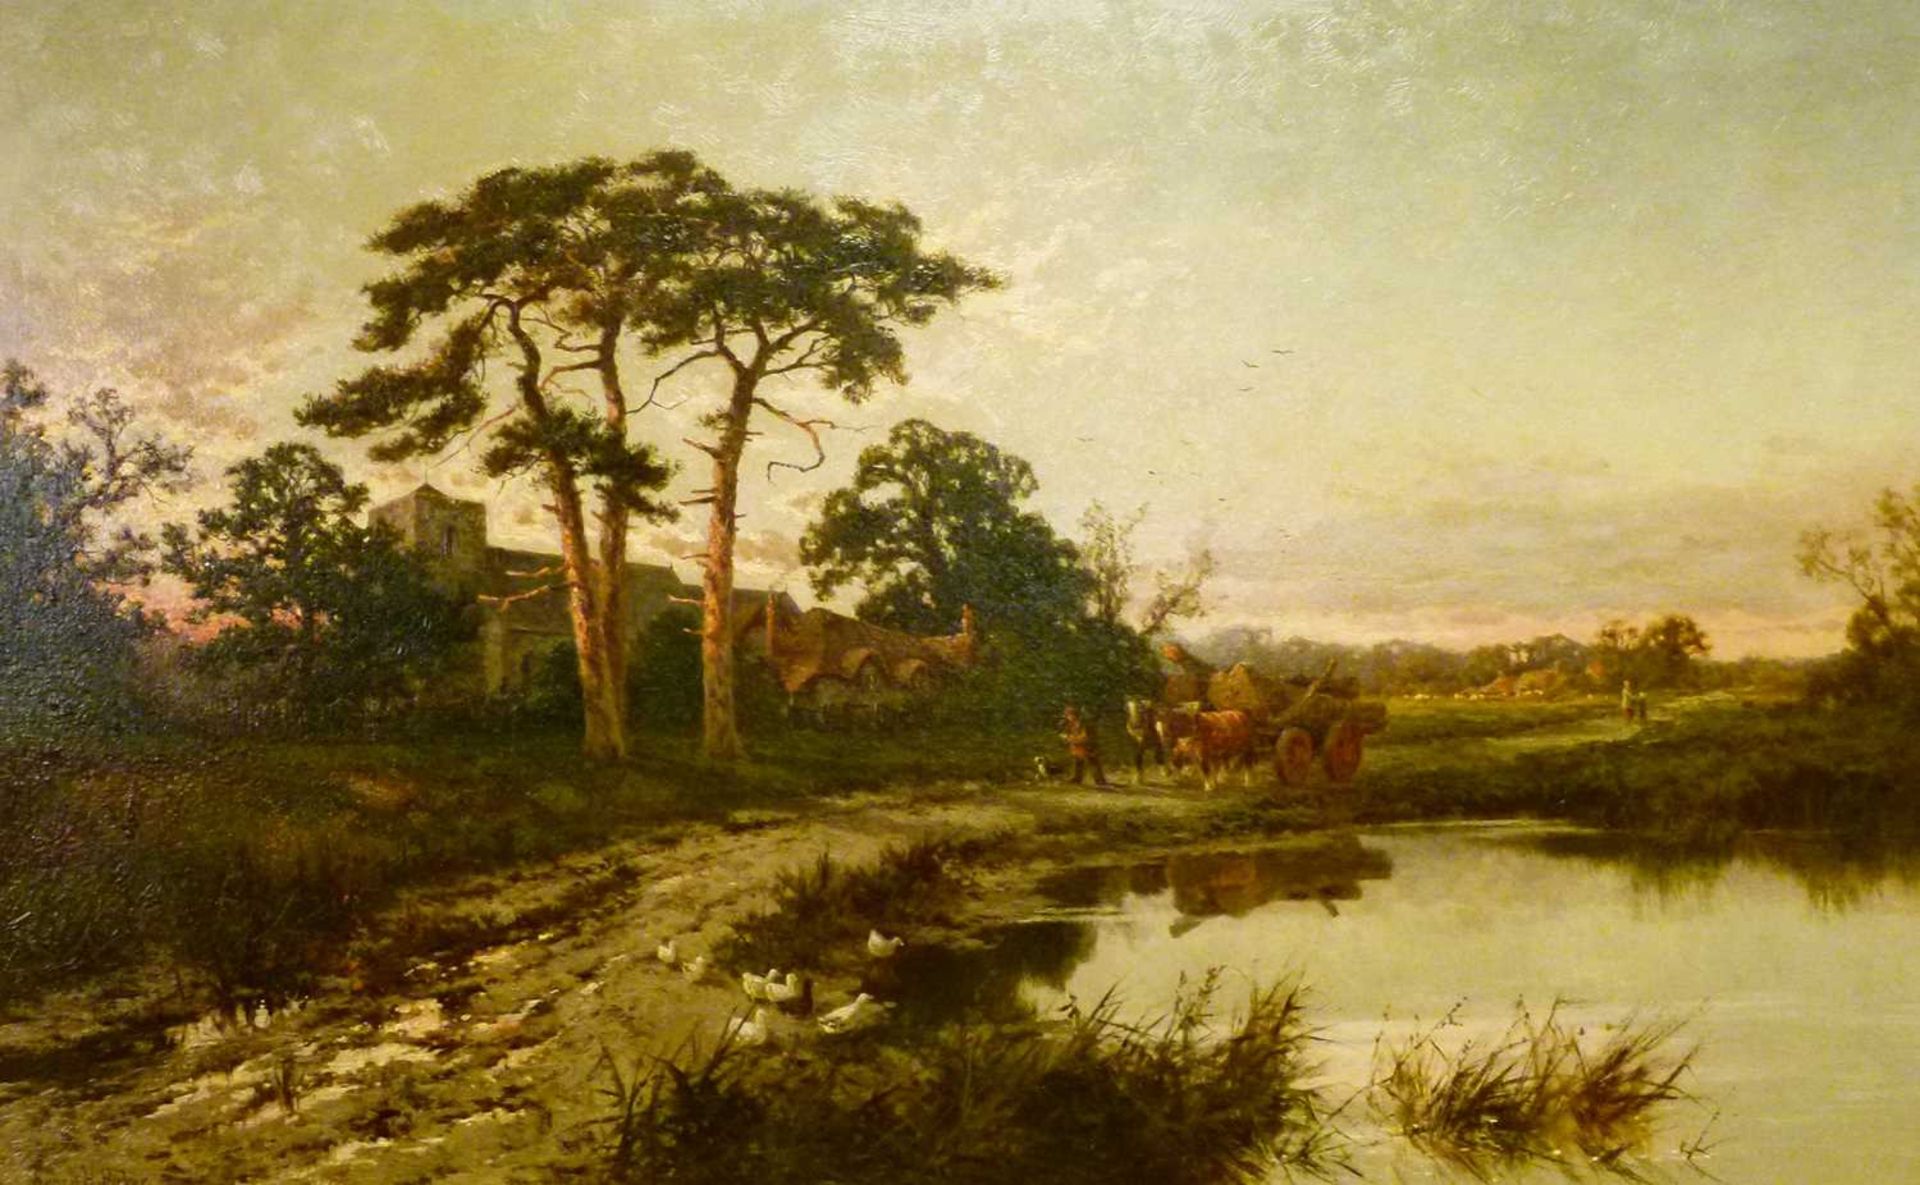 Henry Hillier Parker (1858-1930) - Oil on canvas - 'Near Godalming, Surrey' - Image 23 of 32